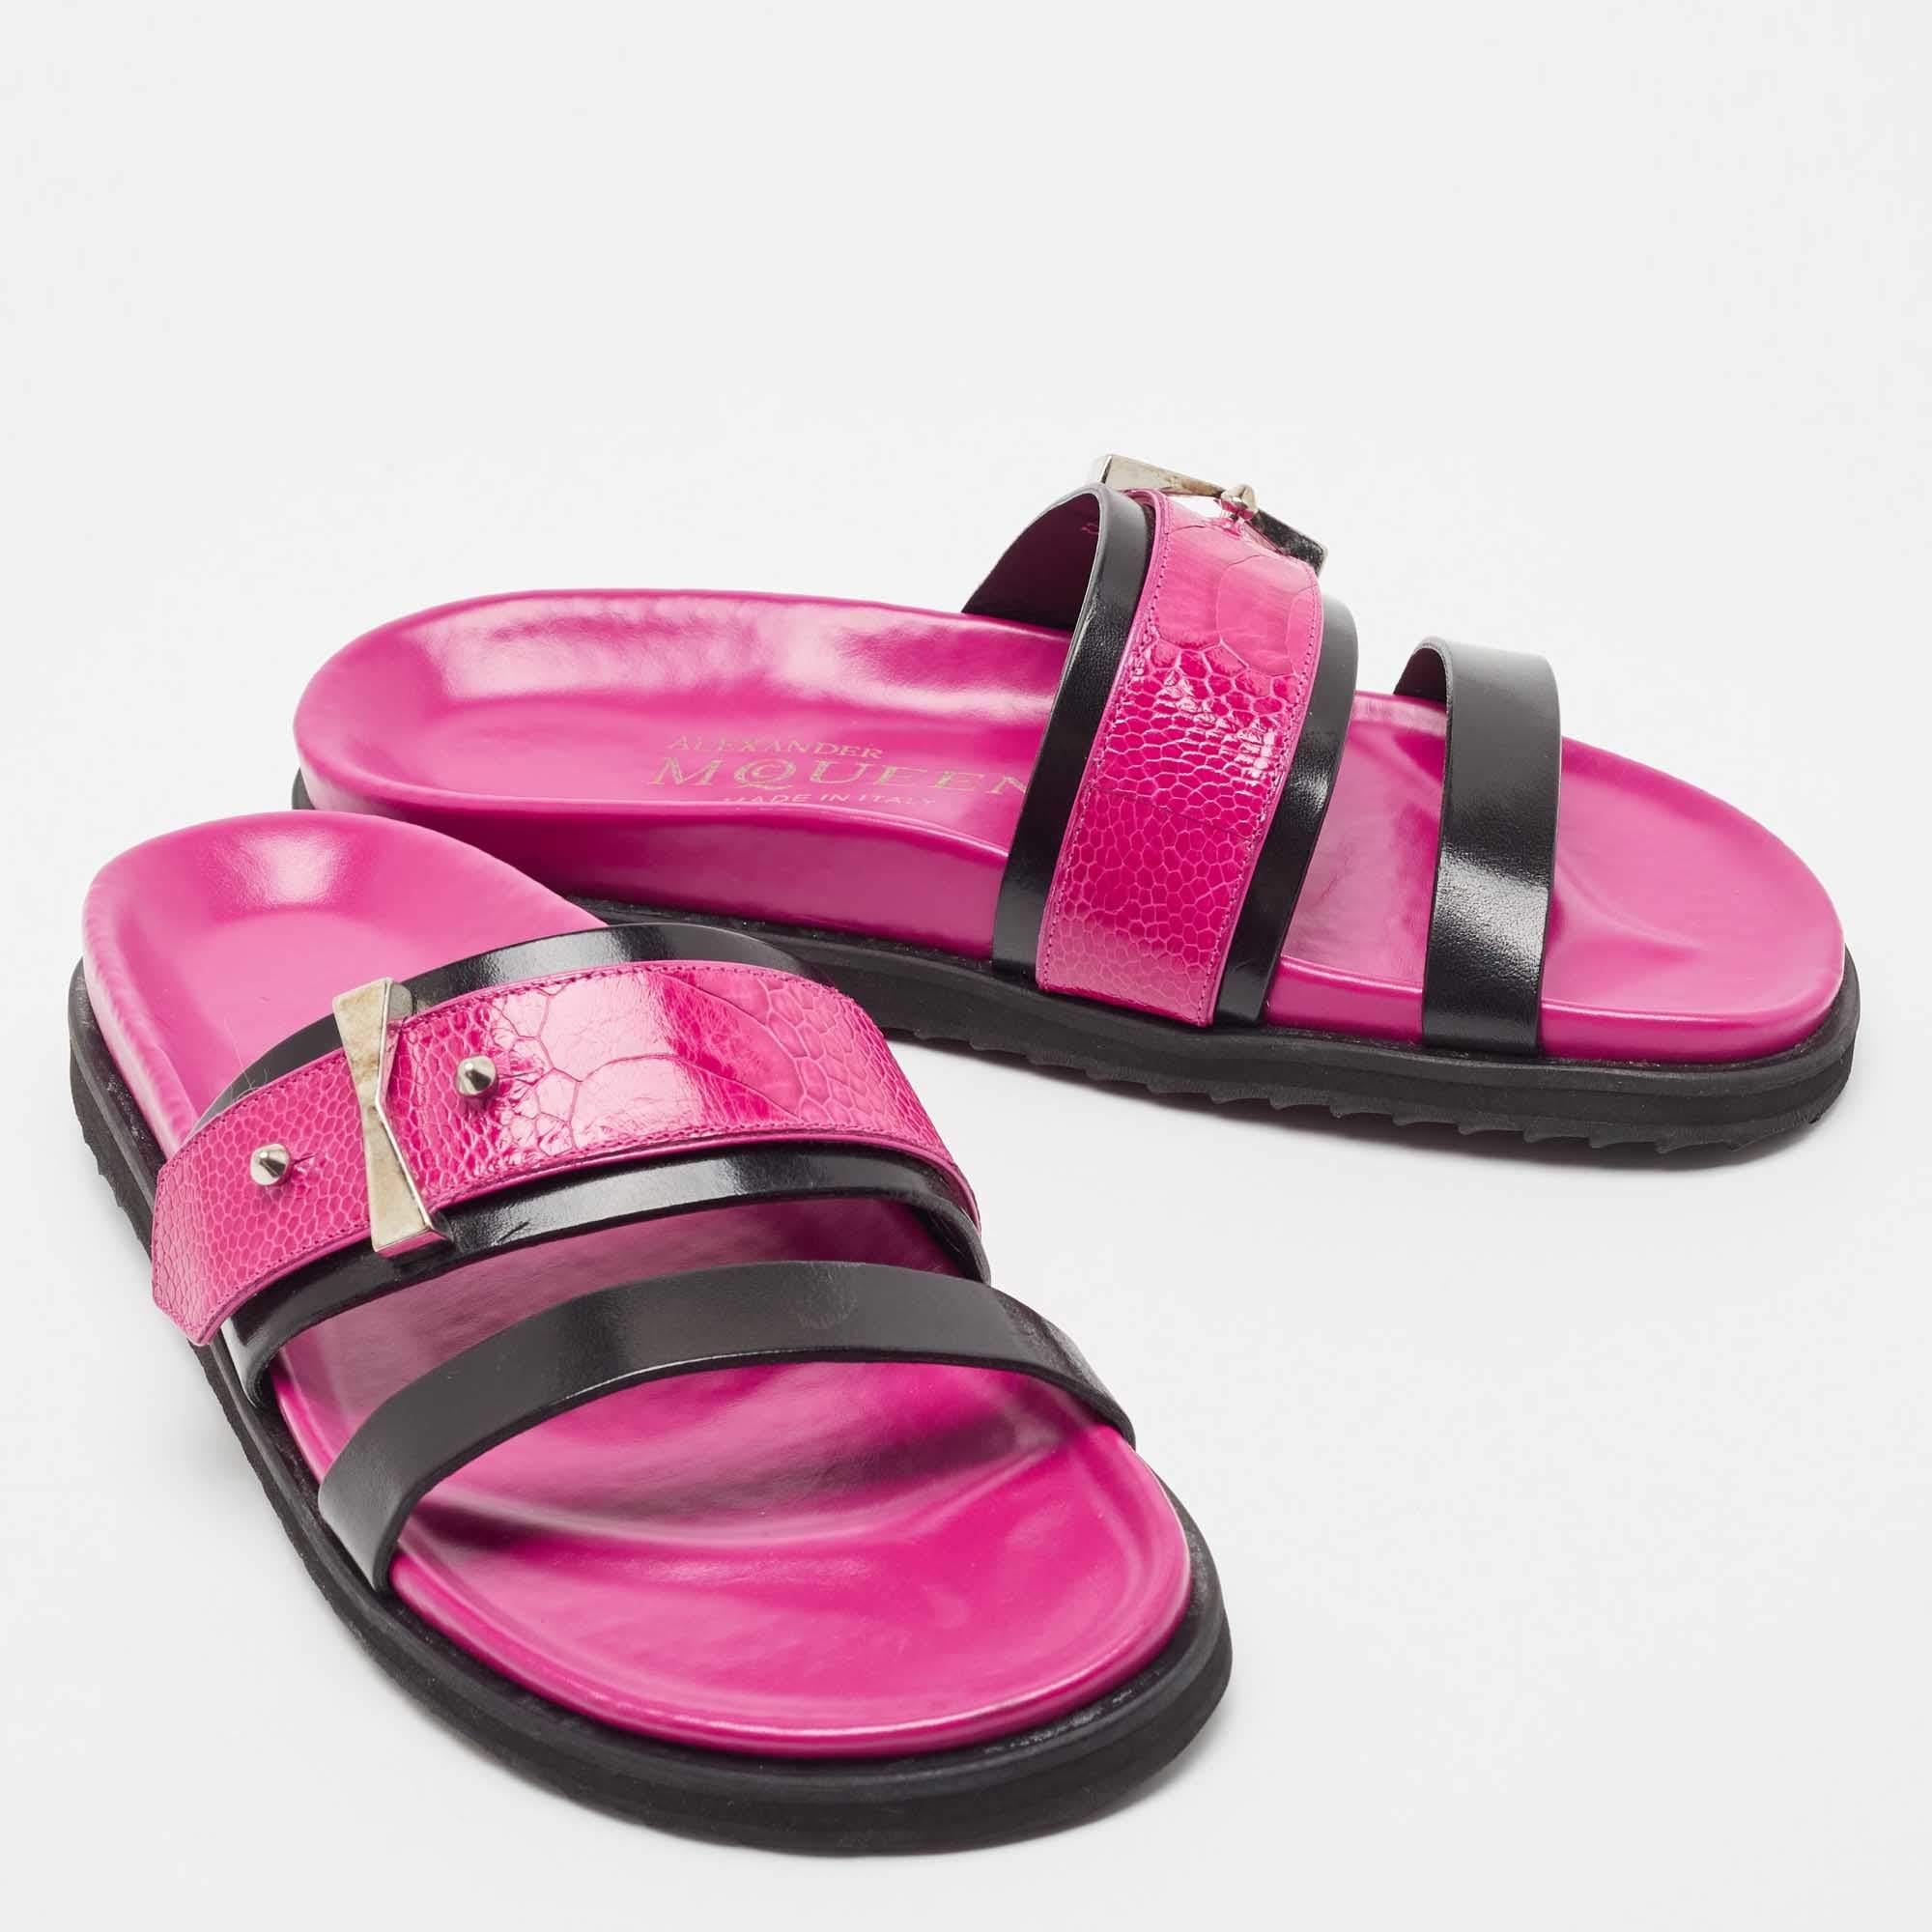 Women's Alexander McQueen Pink/Black Ostrich Embossed and Leather Flat Sandals Size 38